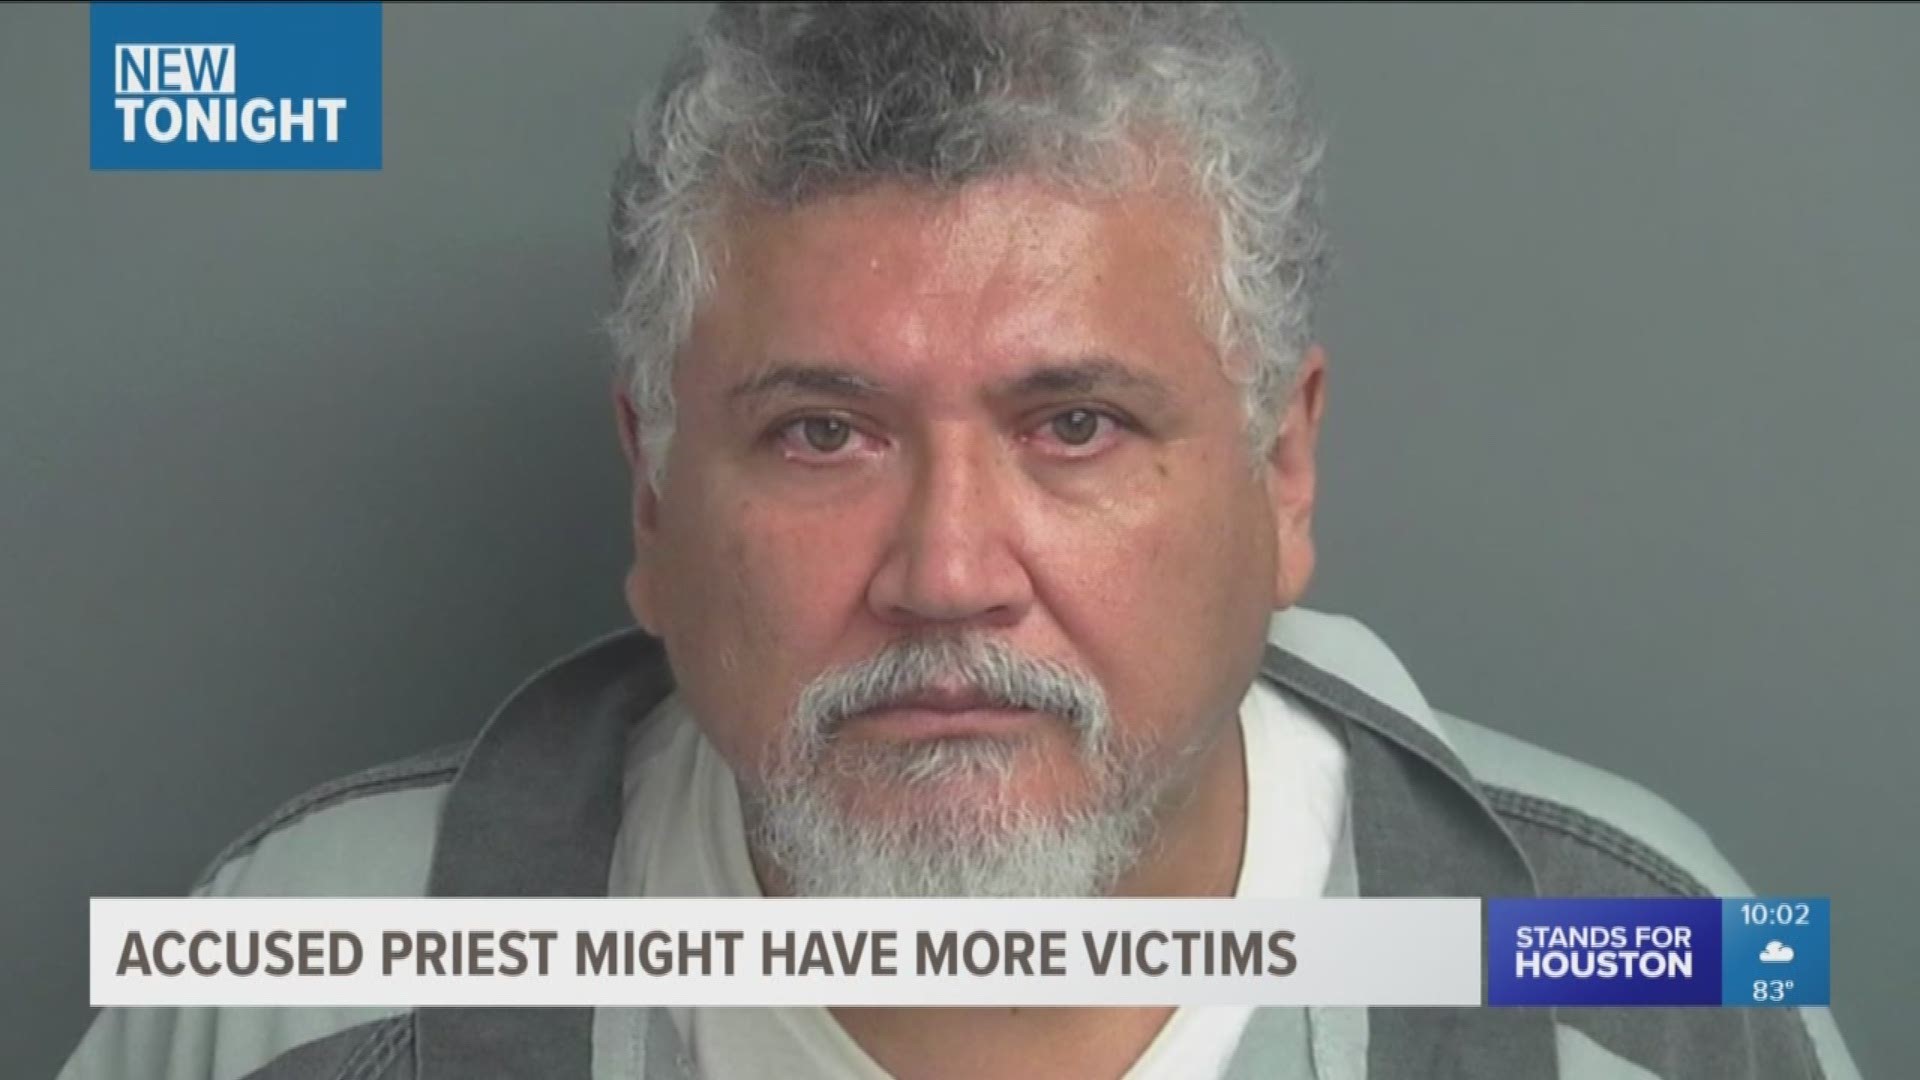 There may be more victims of a priest accused of sexually abusing children at a church in Conroe. This information comes as investigators raid a religious center where Manuel La Rosa Lopez was sent for treatment years ago.